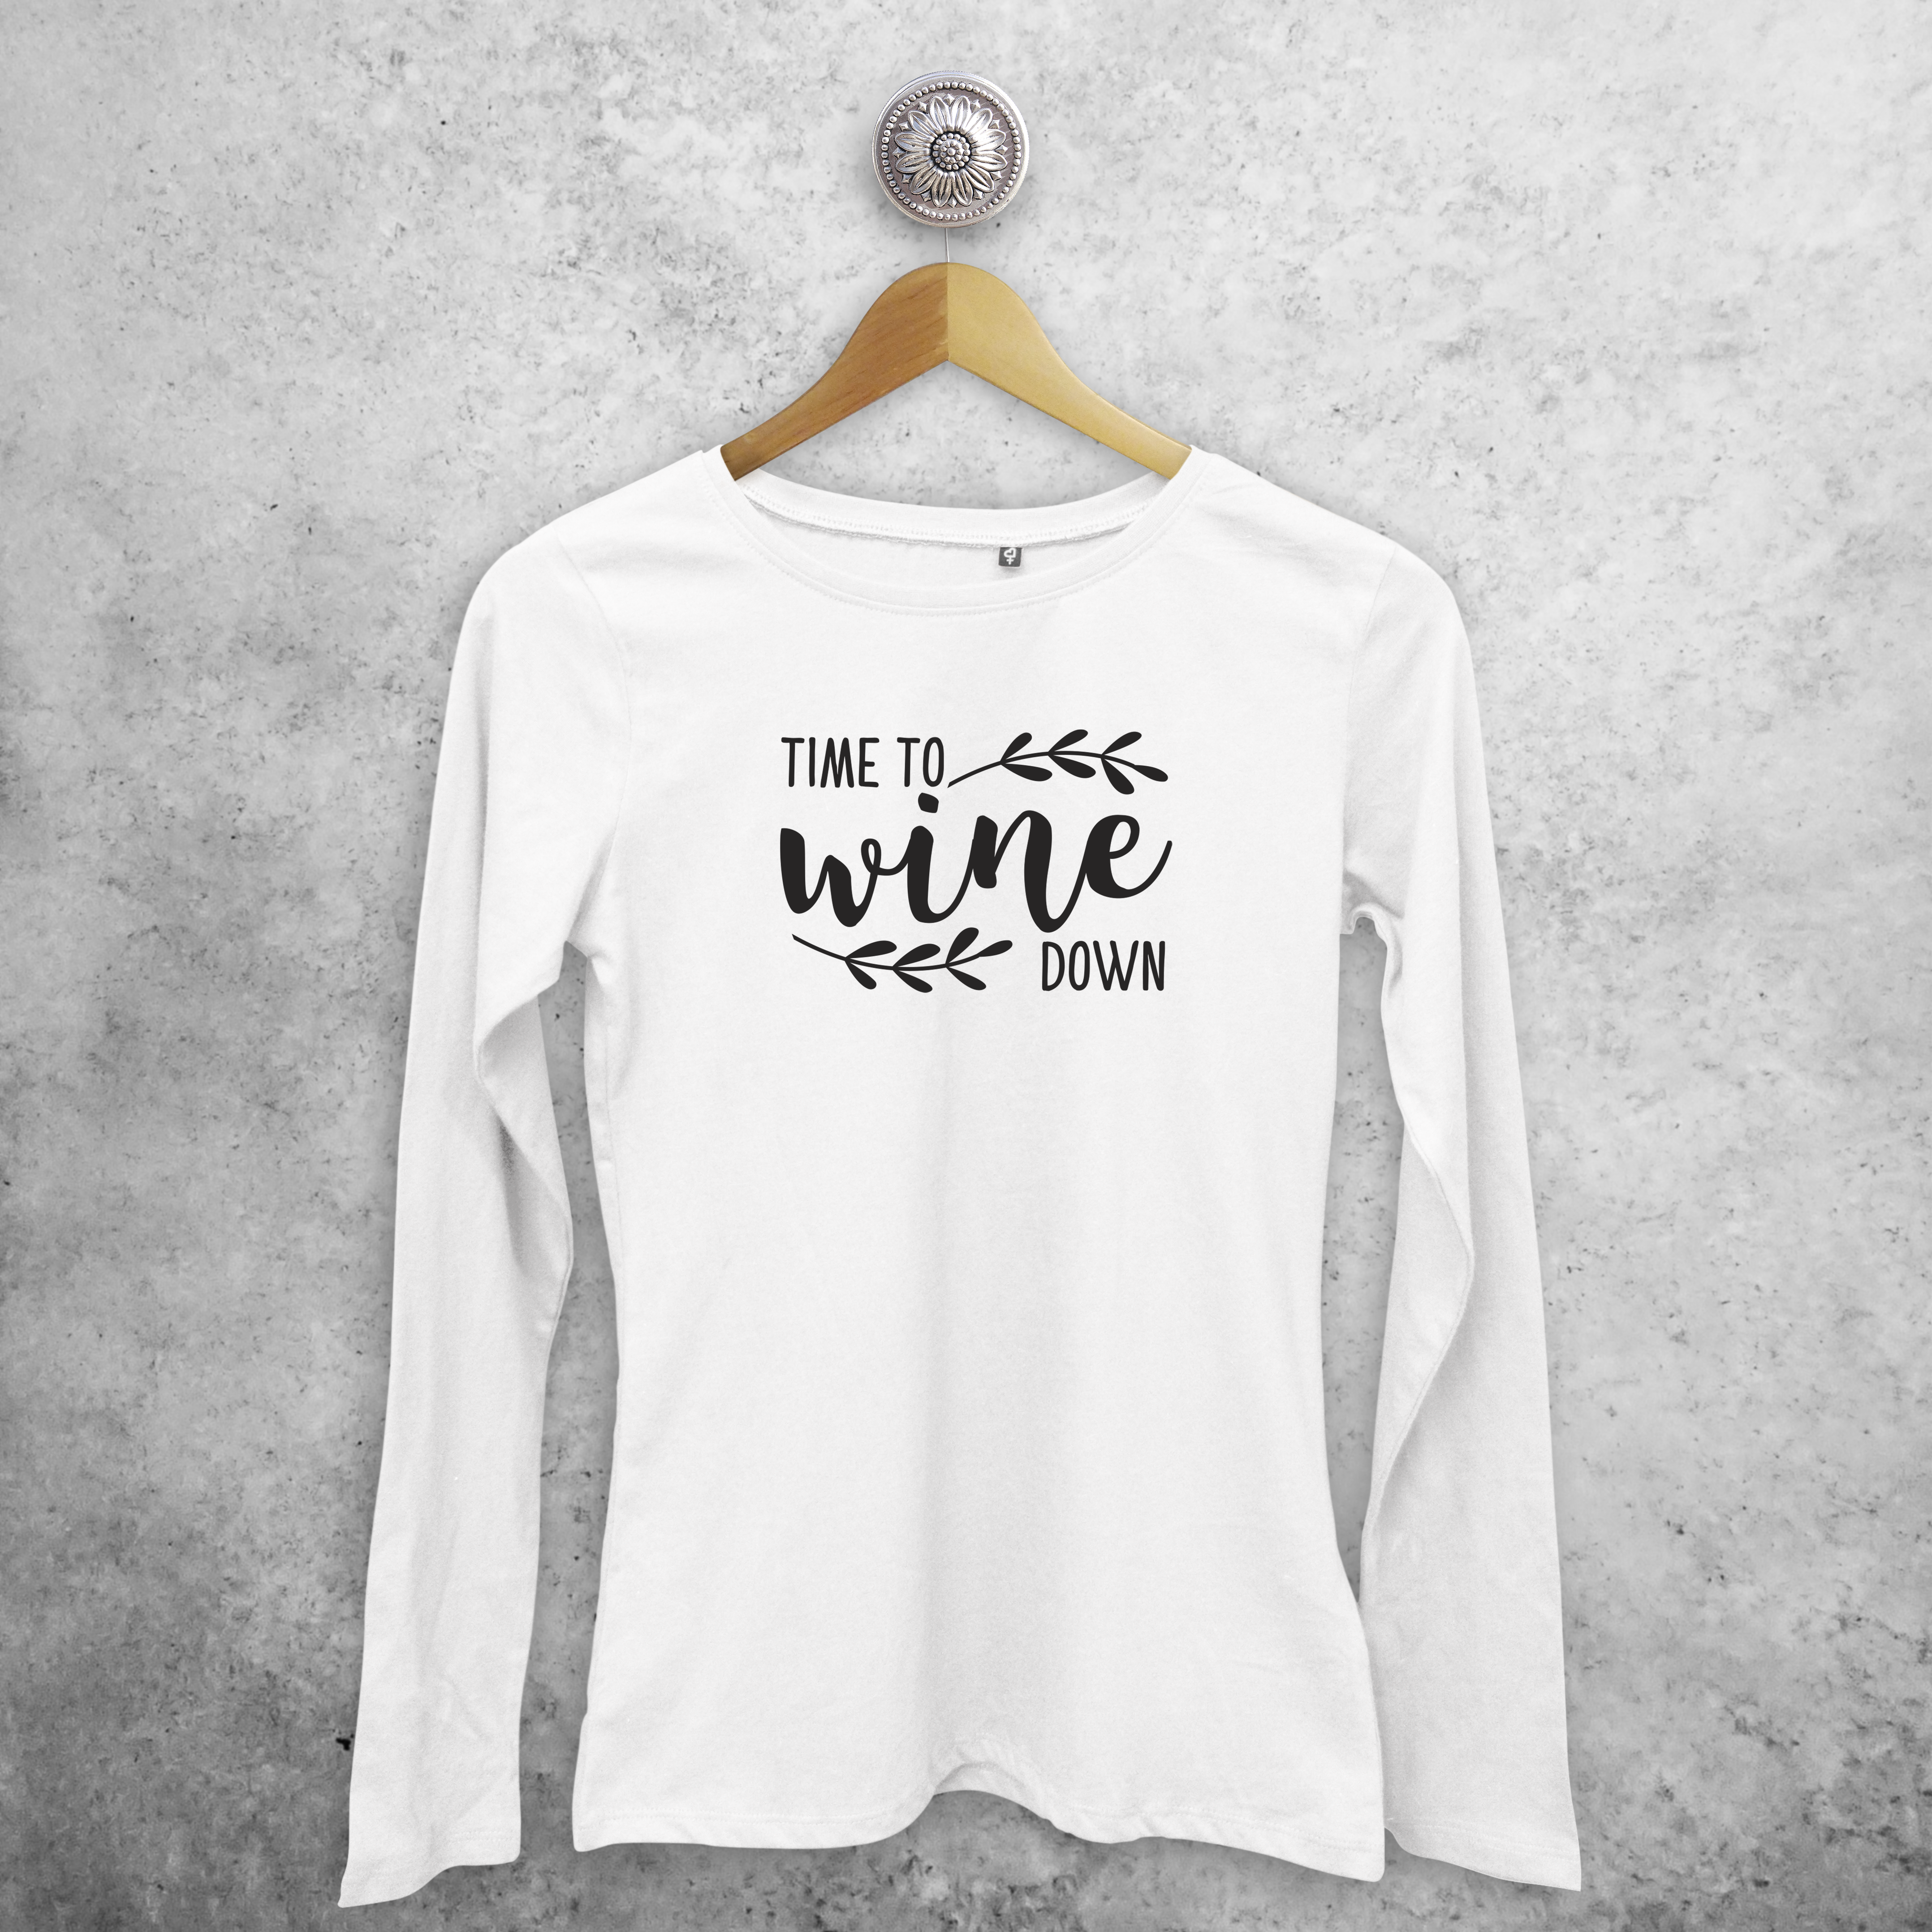 'Time to wine down' adult longsleeve shirt